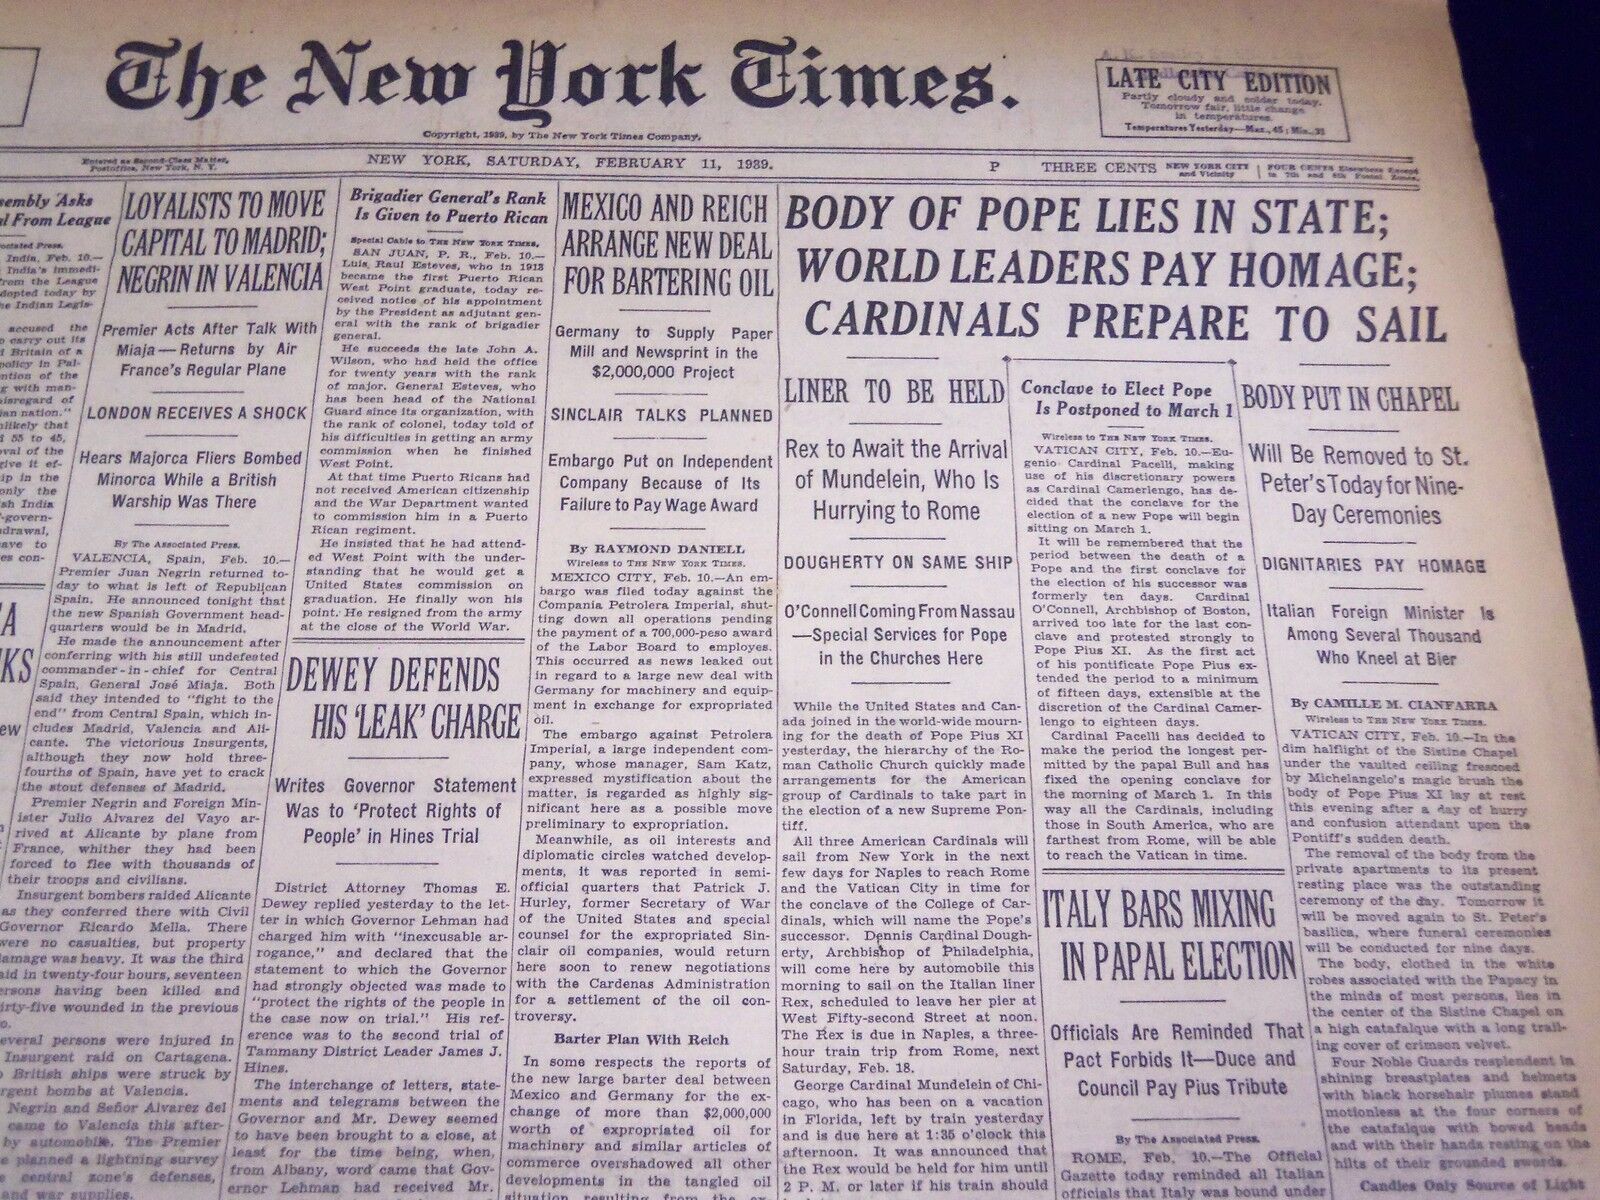 1939 FEBRUARY 11 NEW YORK TIMES - BODY OF POPE LIPS IN STATE - NT 4358